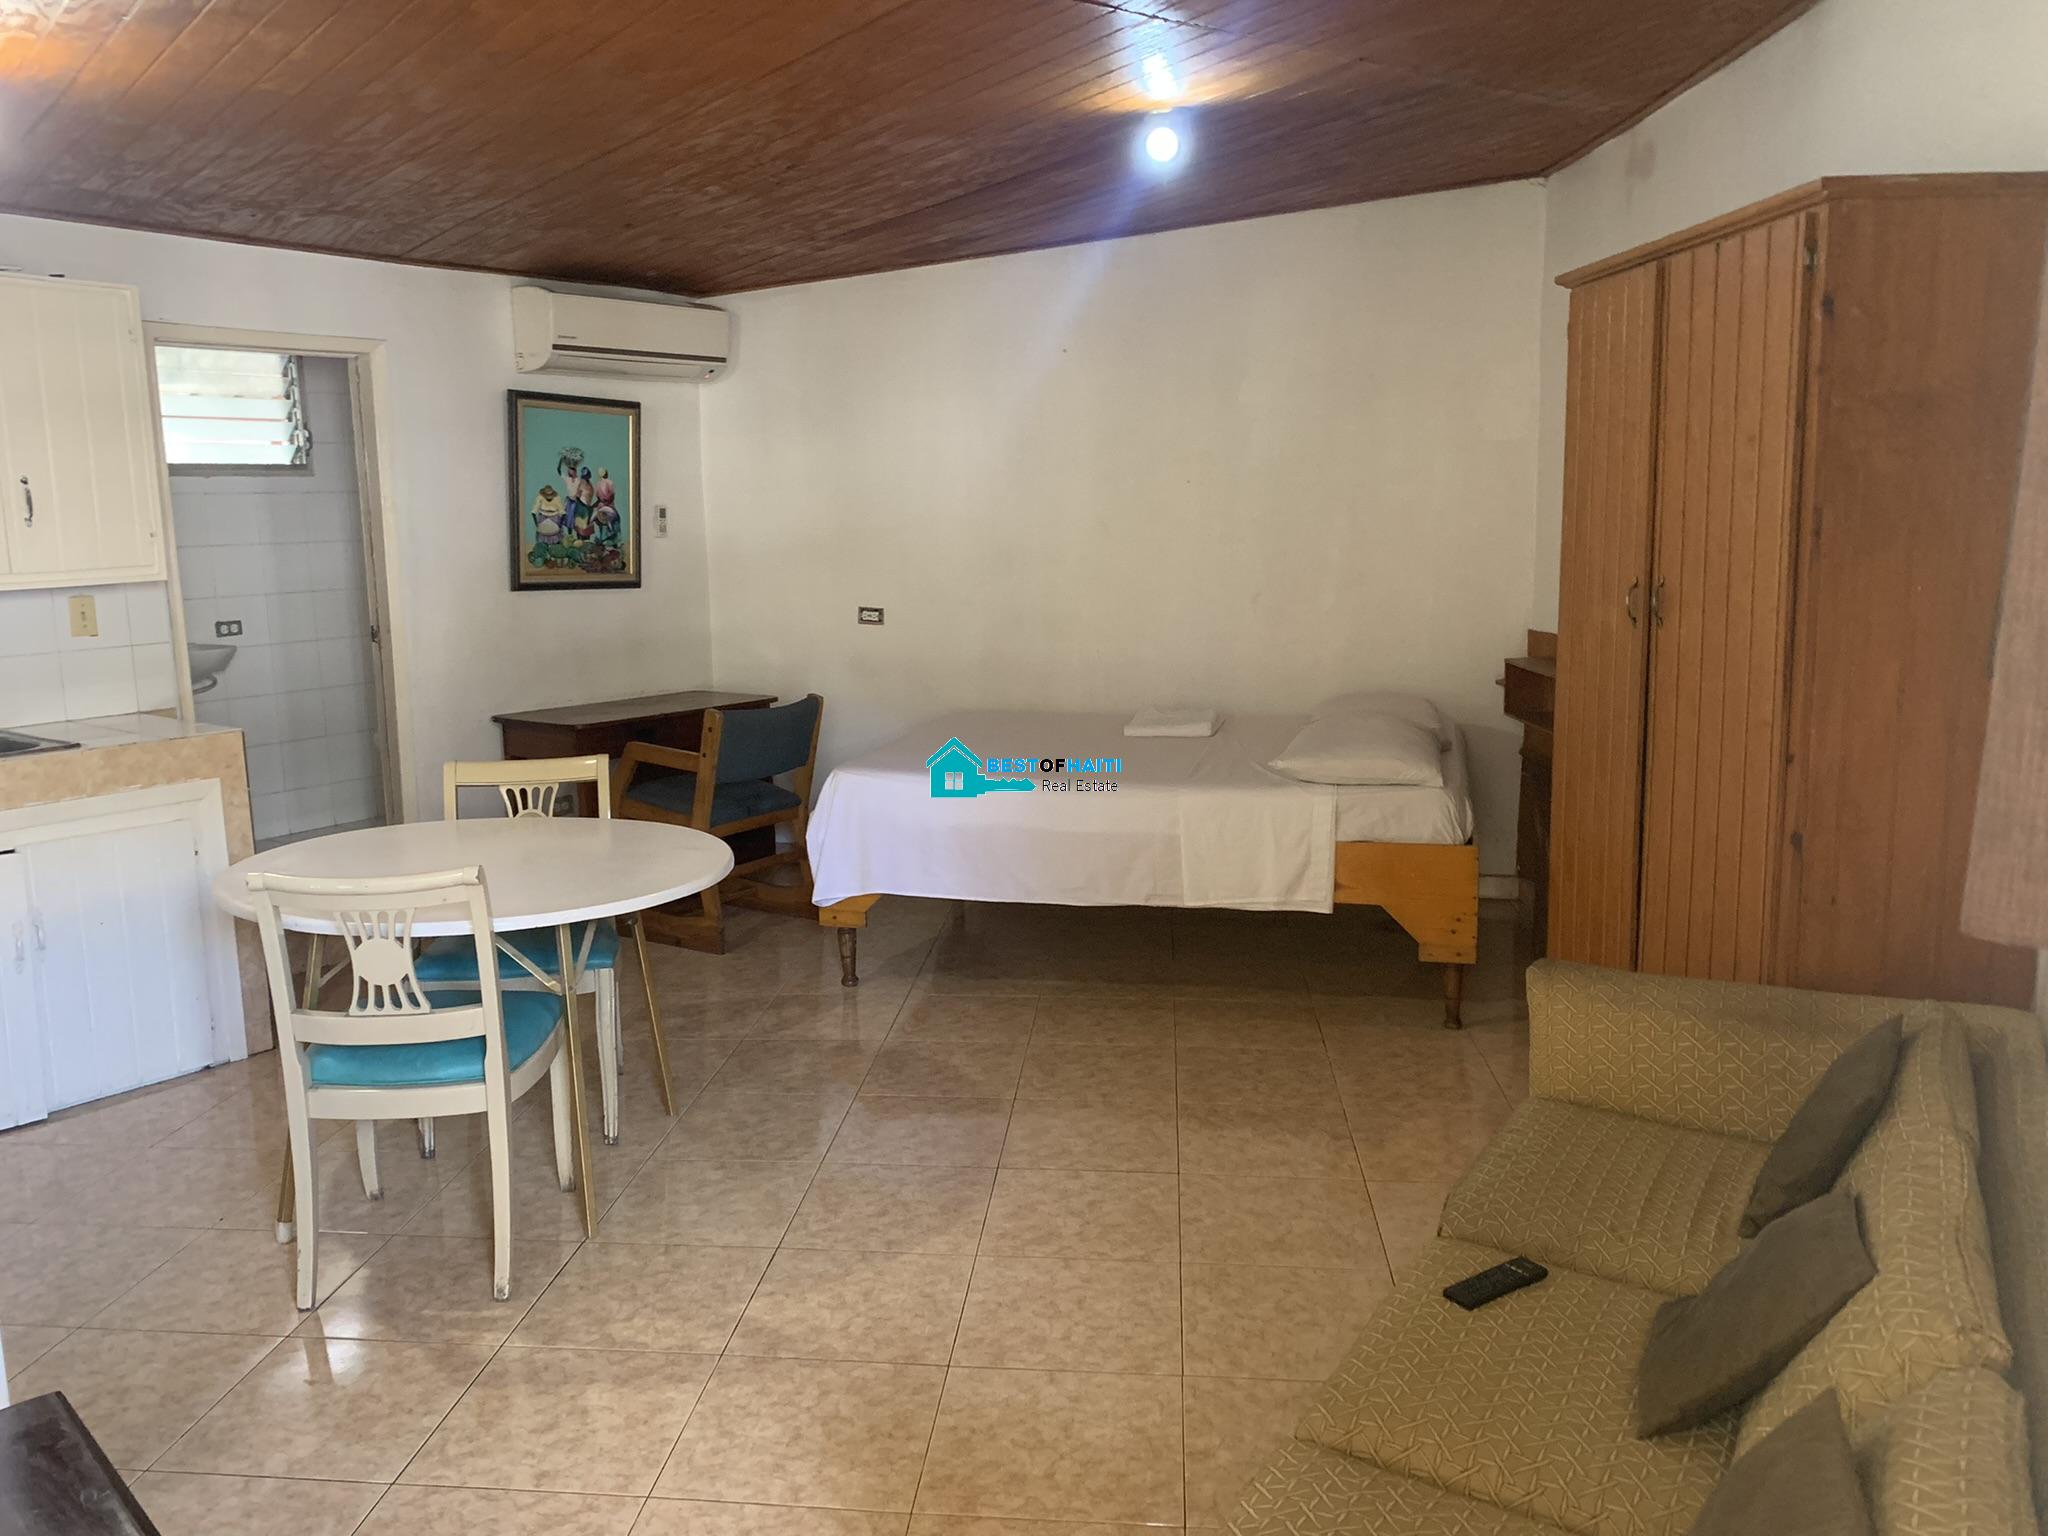 Furnished Studio Apartment for Rent in Petion-Ville, Haiti - 24/7 Electricity